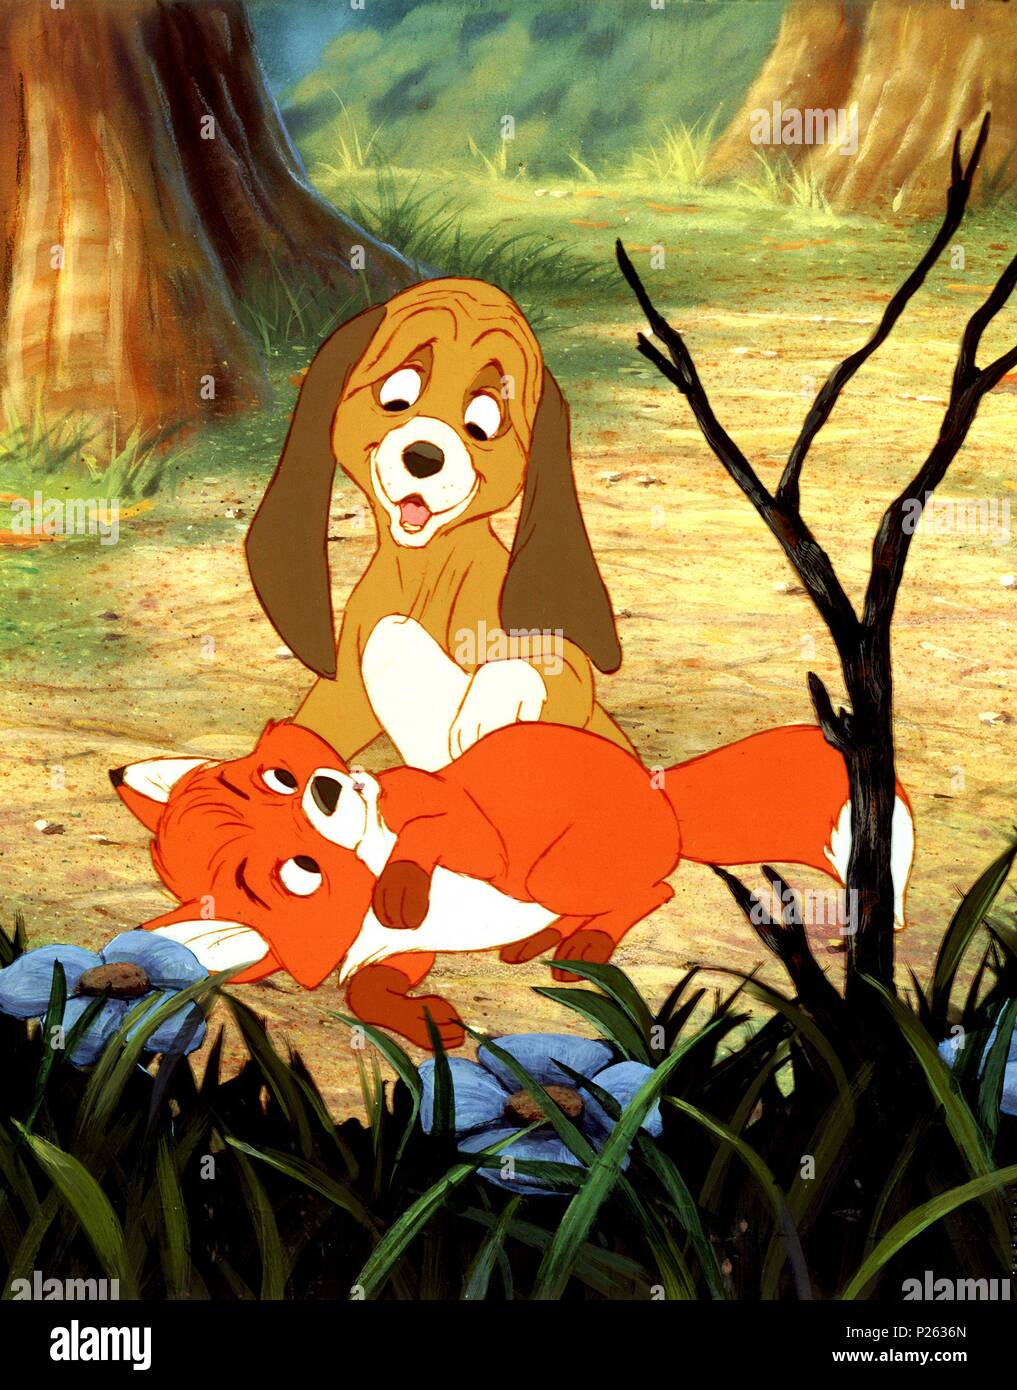 Original Film Title: THE FOX AND THE HOUND. English Title: THE FOX AND THE HOUND. Film Director: RICHARD RICH; BARRY ART STEVENS. Year: 1981. Credit: WALT DISNEY PRODUCTIONS / Album Stock